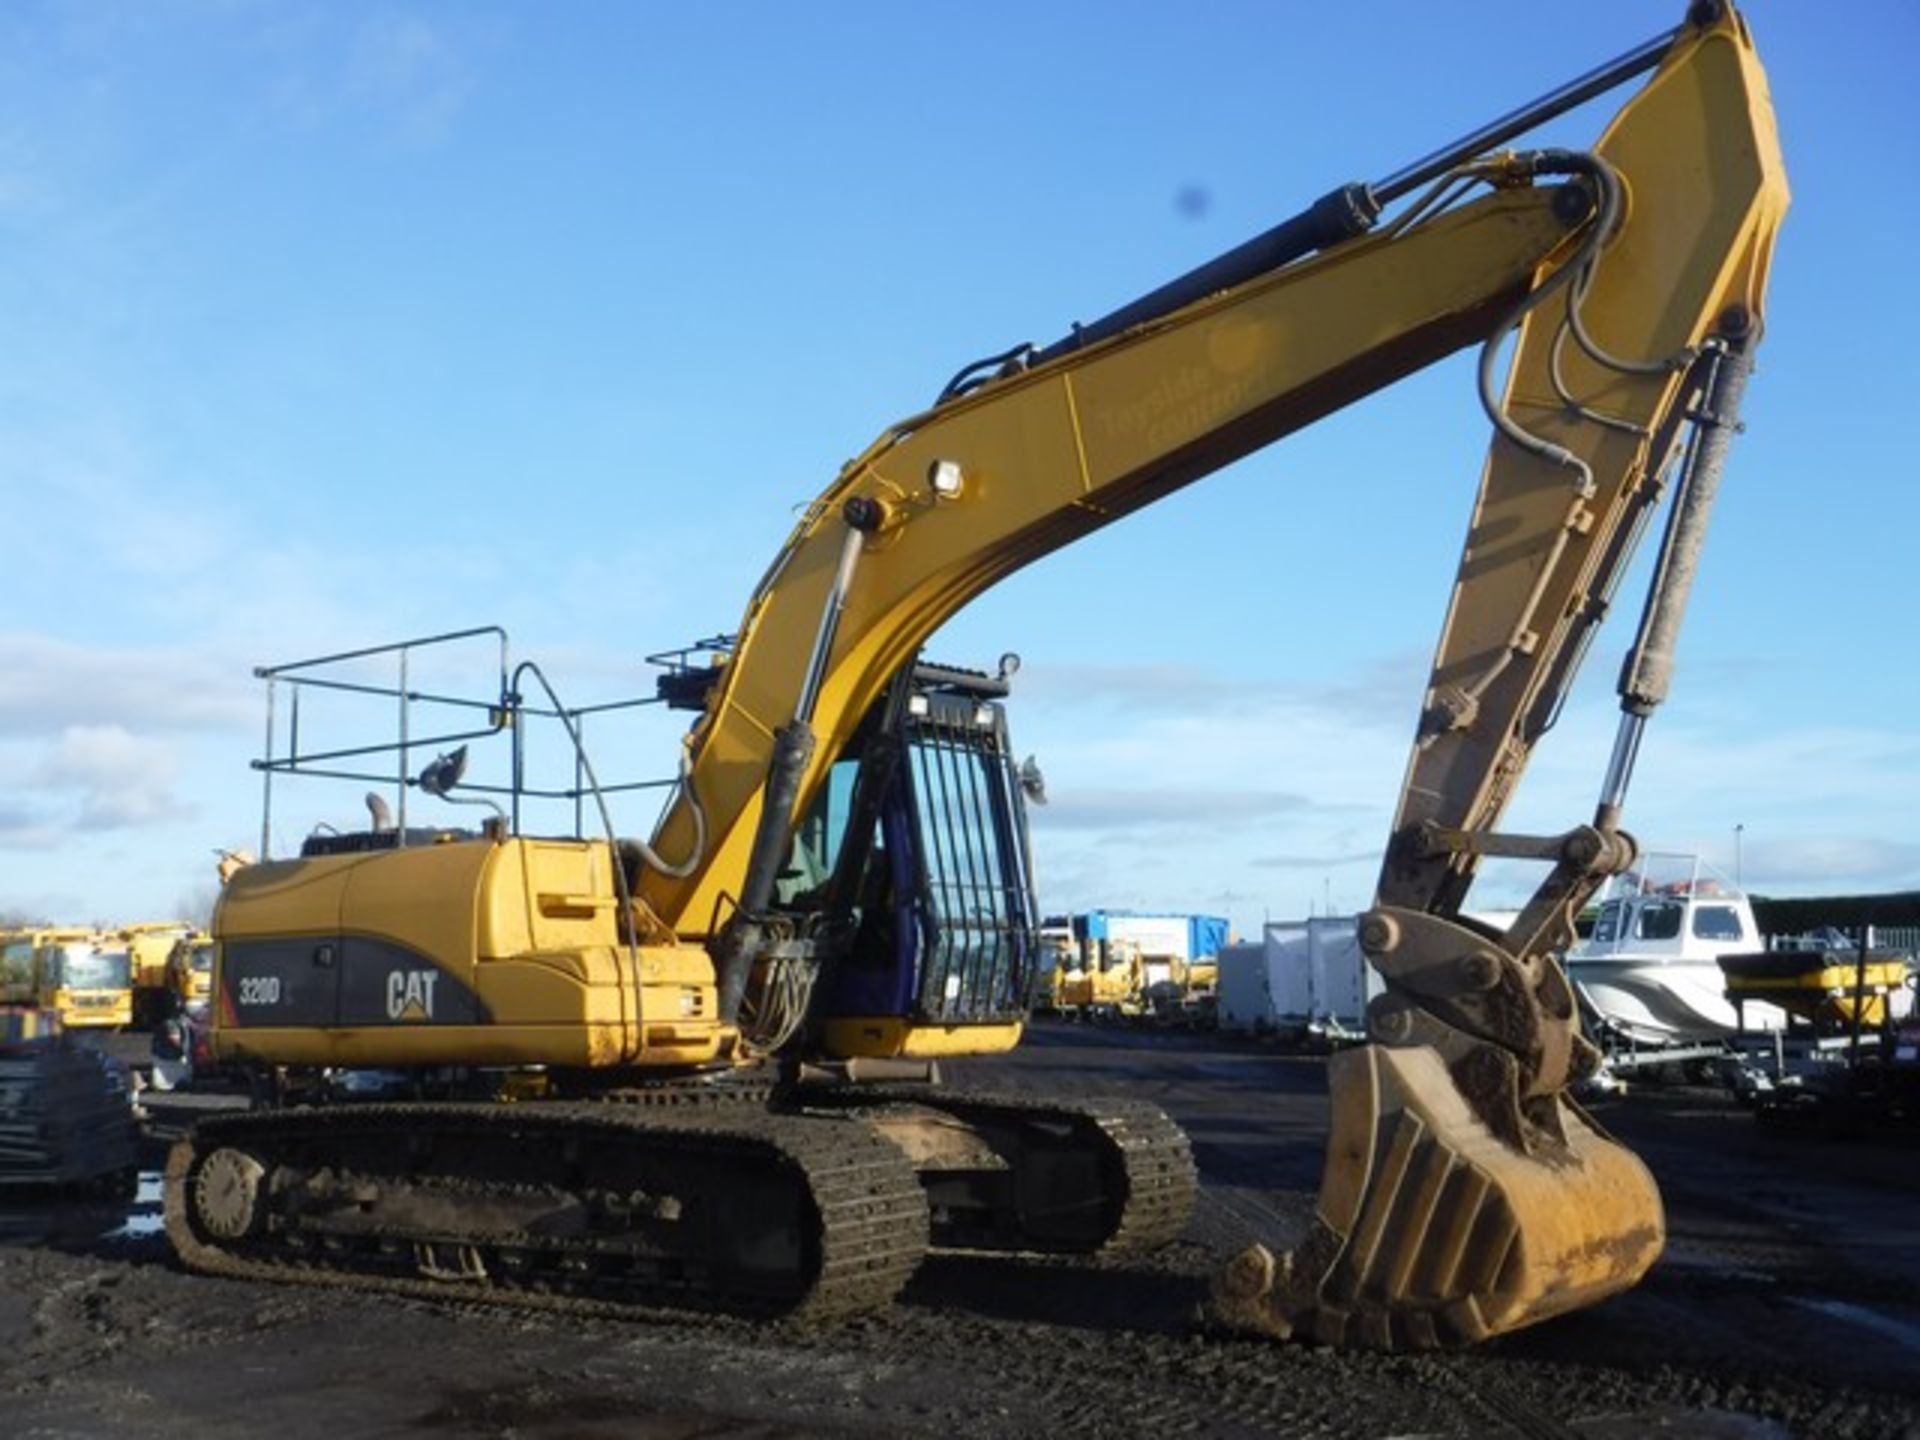 CATERPILLAR 320D TRACKED 360 EXCAVATOR, QUICK HITCH, 2xBUCKETS AND FORKS YEAR 2007 15491 HOURS (NOT - Image 2 of 39